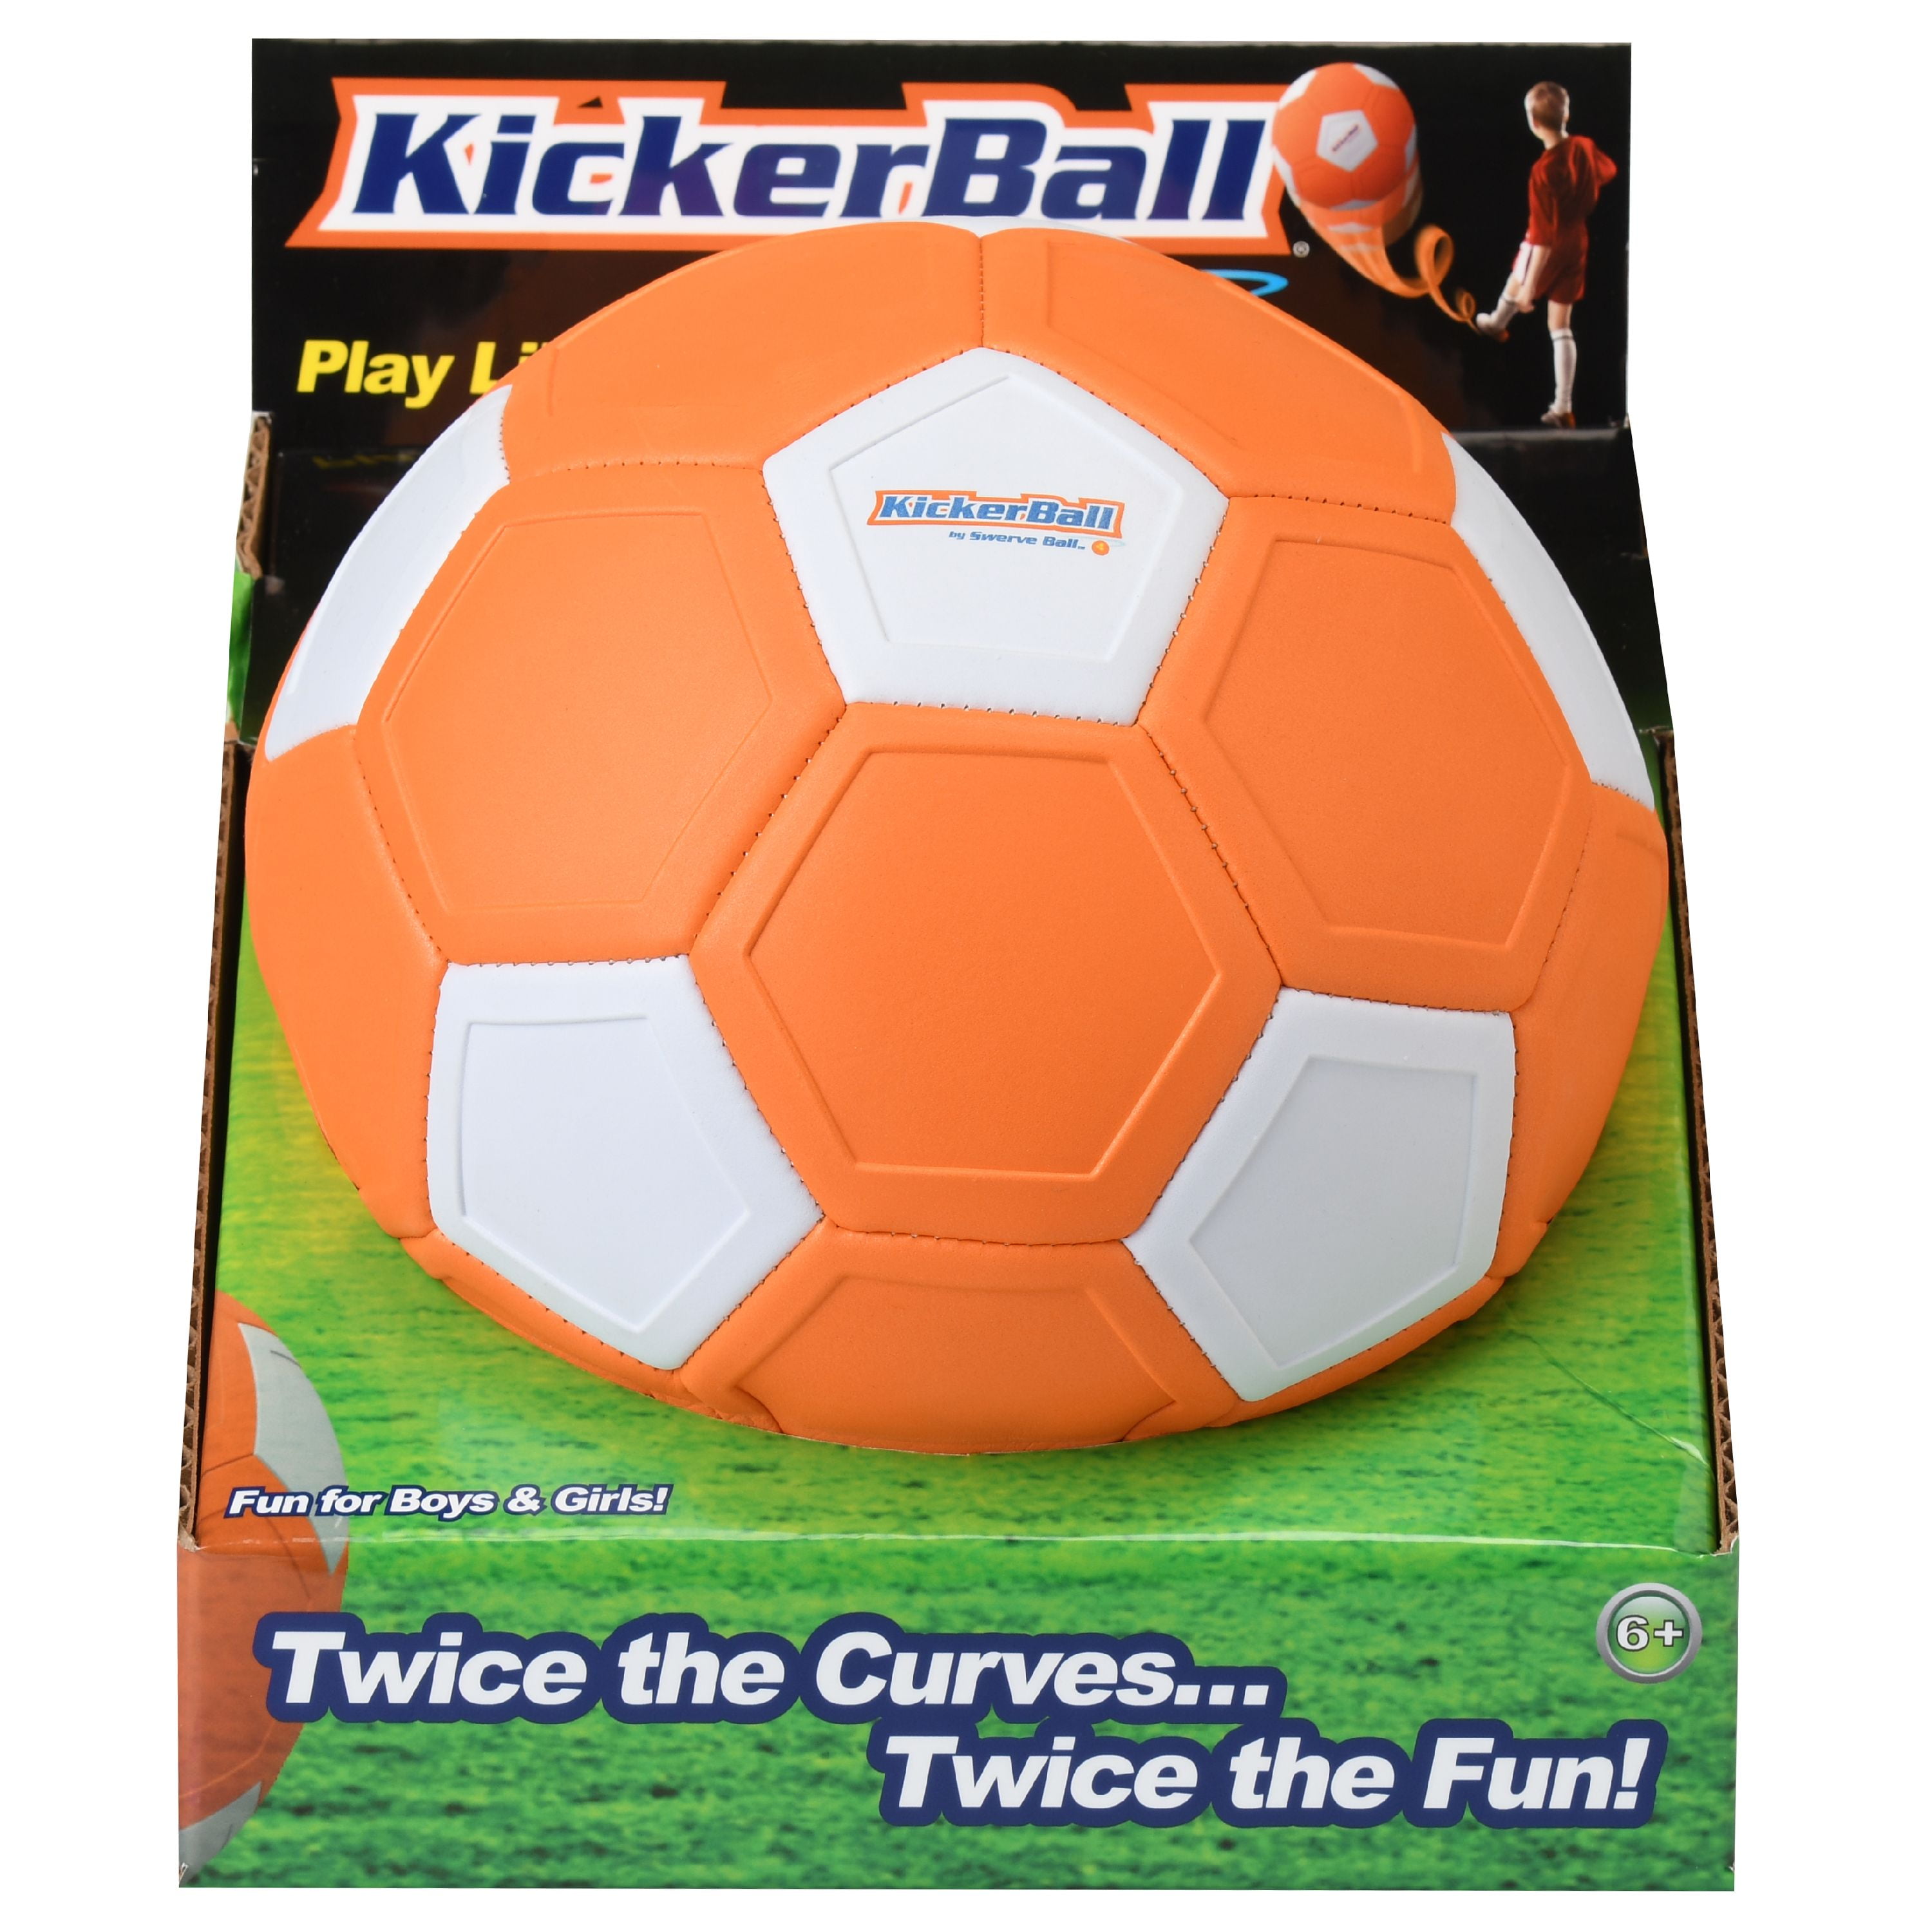 Kickerball By Swerve Ball Kids Adults Play Toys Outdoor Football Curving 